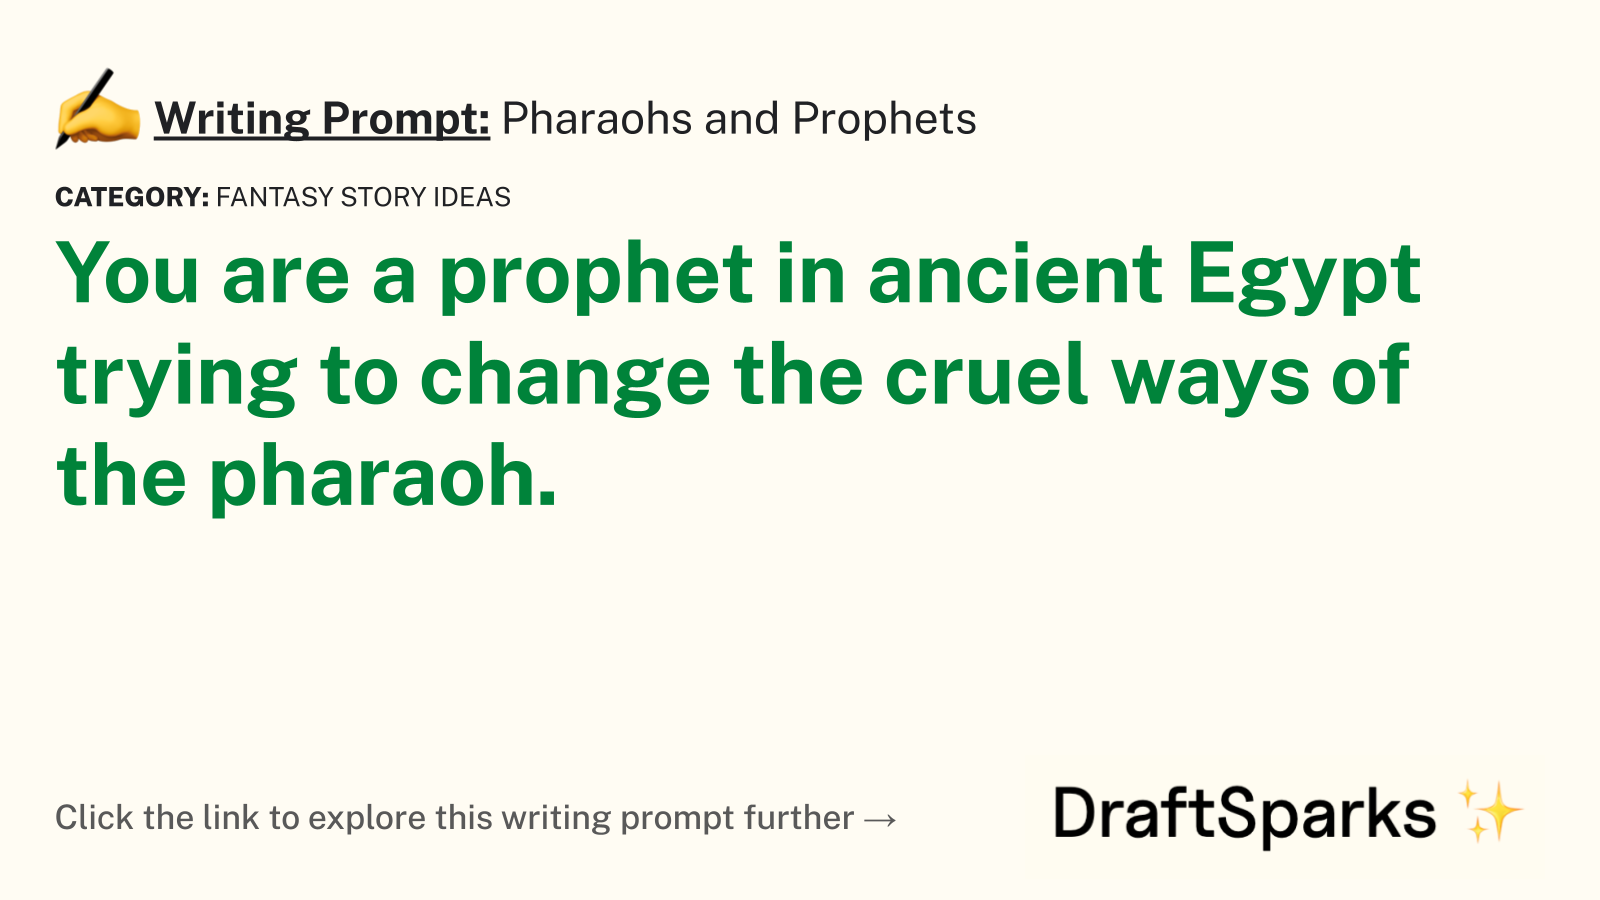 Pharaohs and Prophets